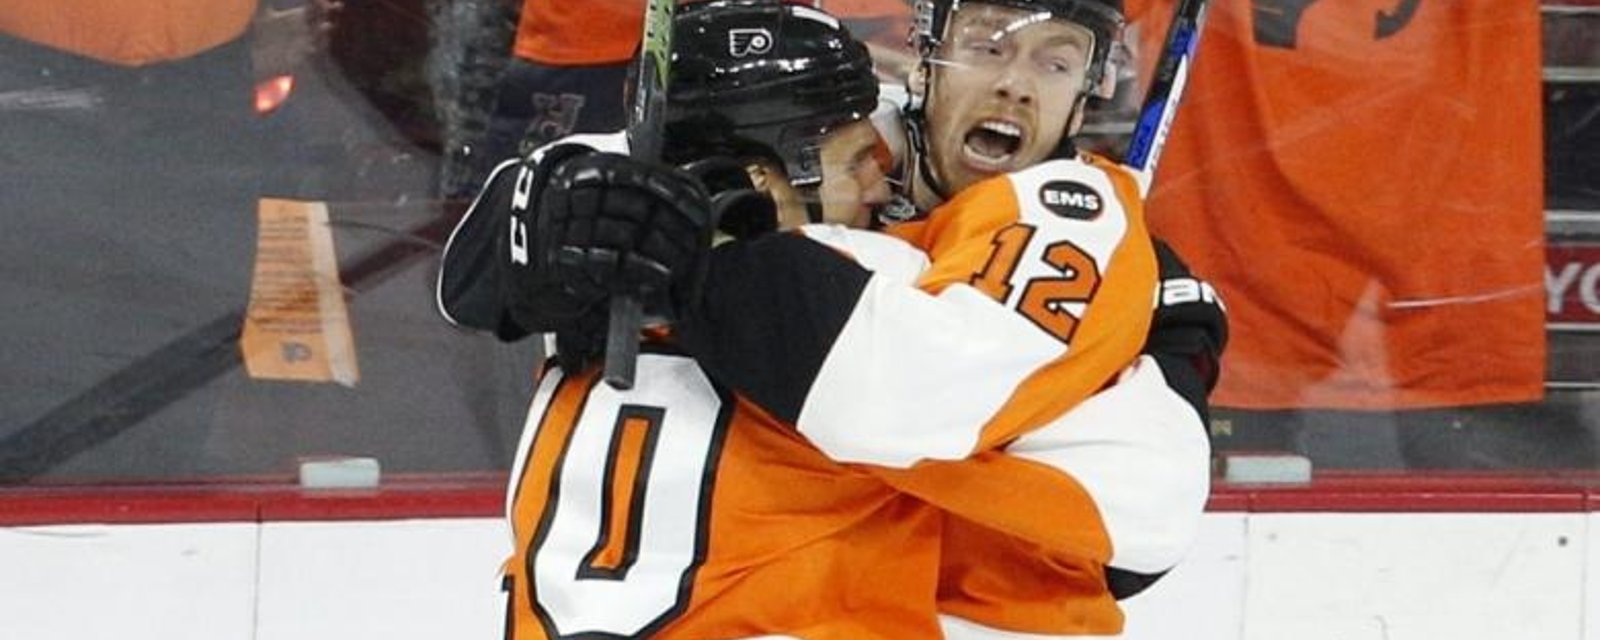 Flyers need less than one minute to score in their first home game of the playoffs.